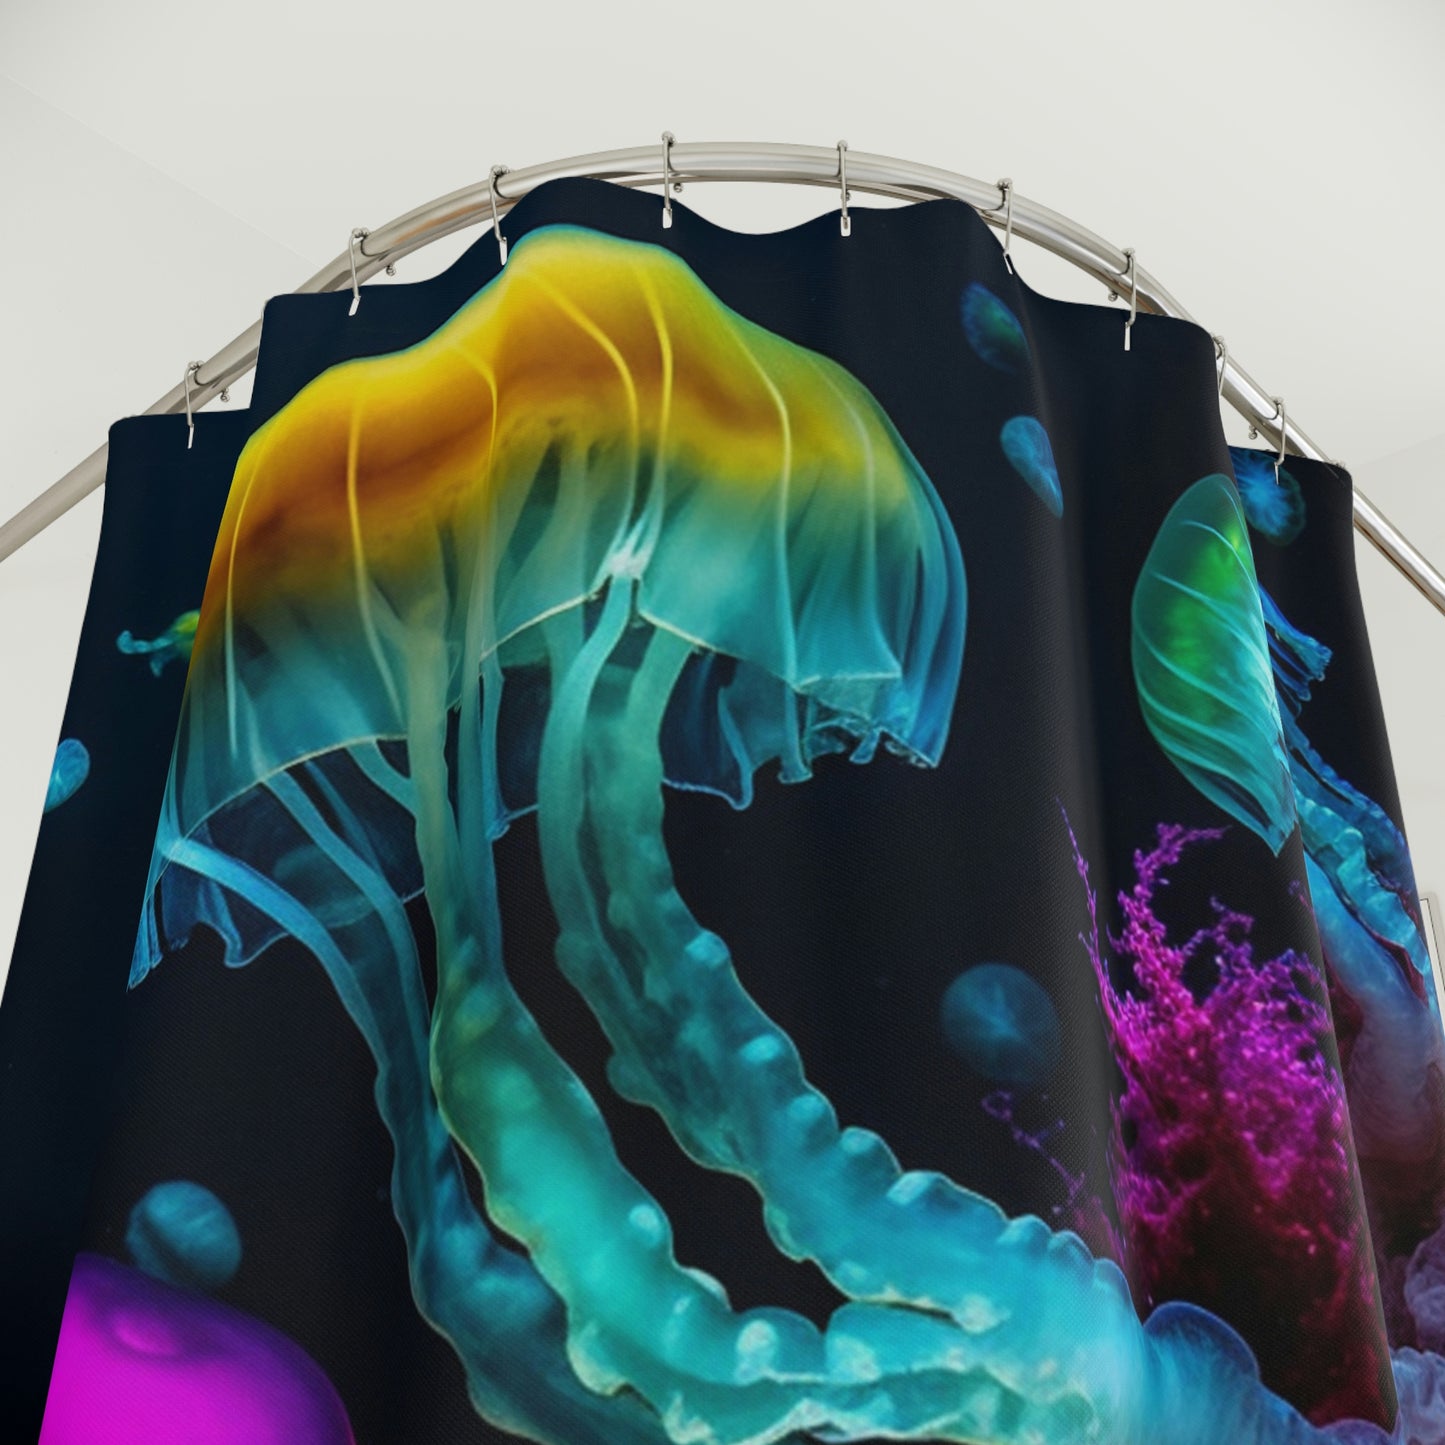 Polyester Shower Curtain neon party jelly 3